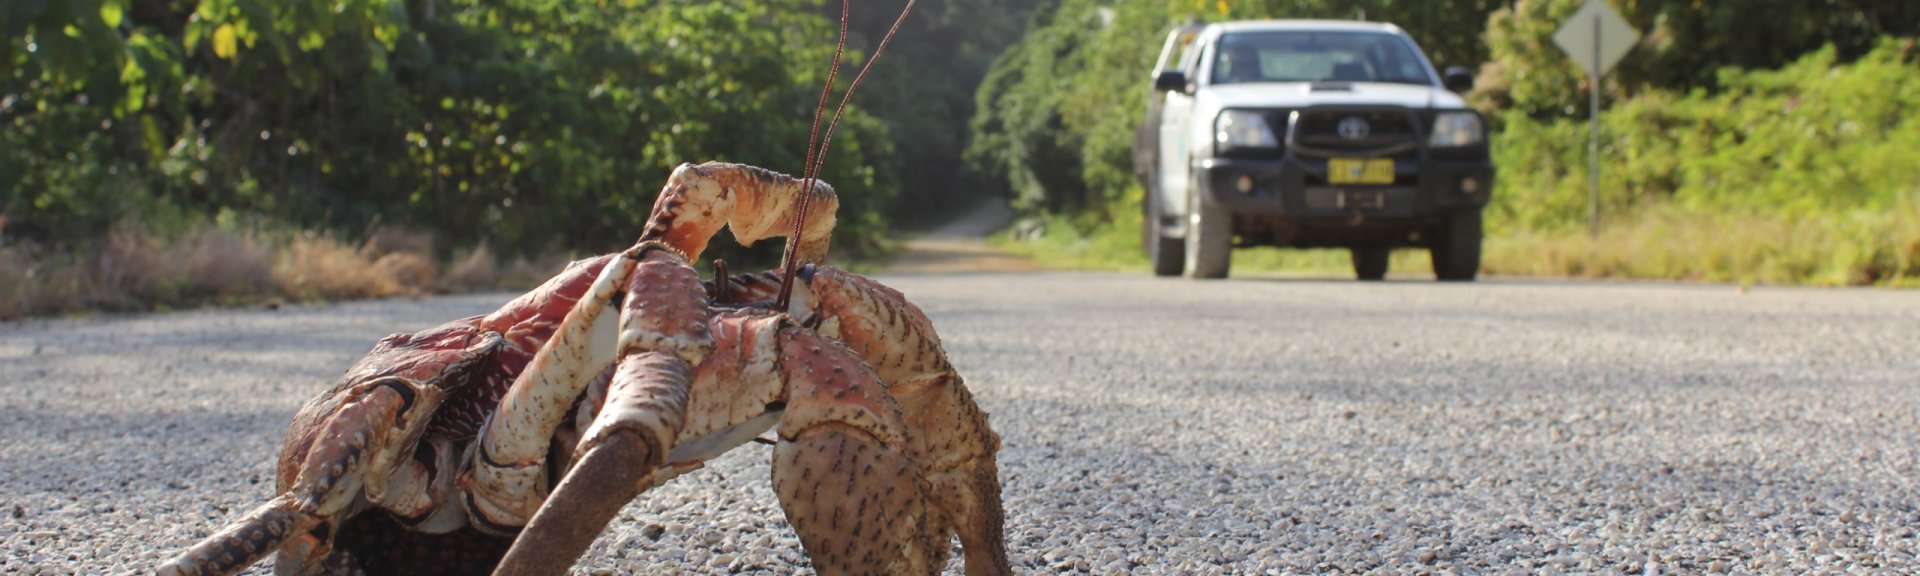 Watch out for robber crabs when driving